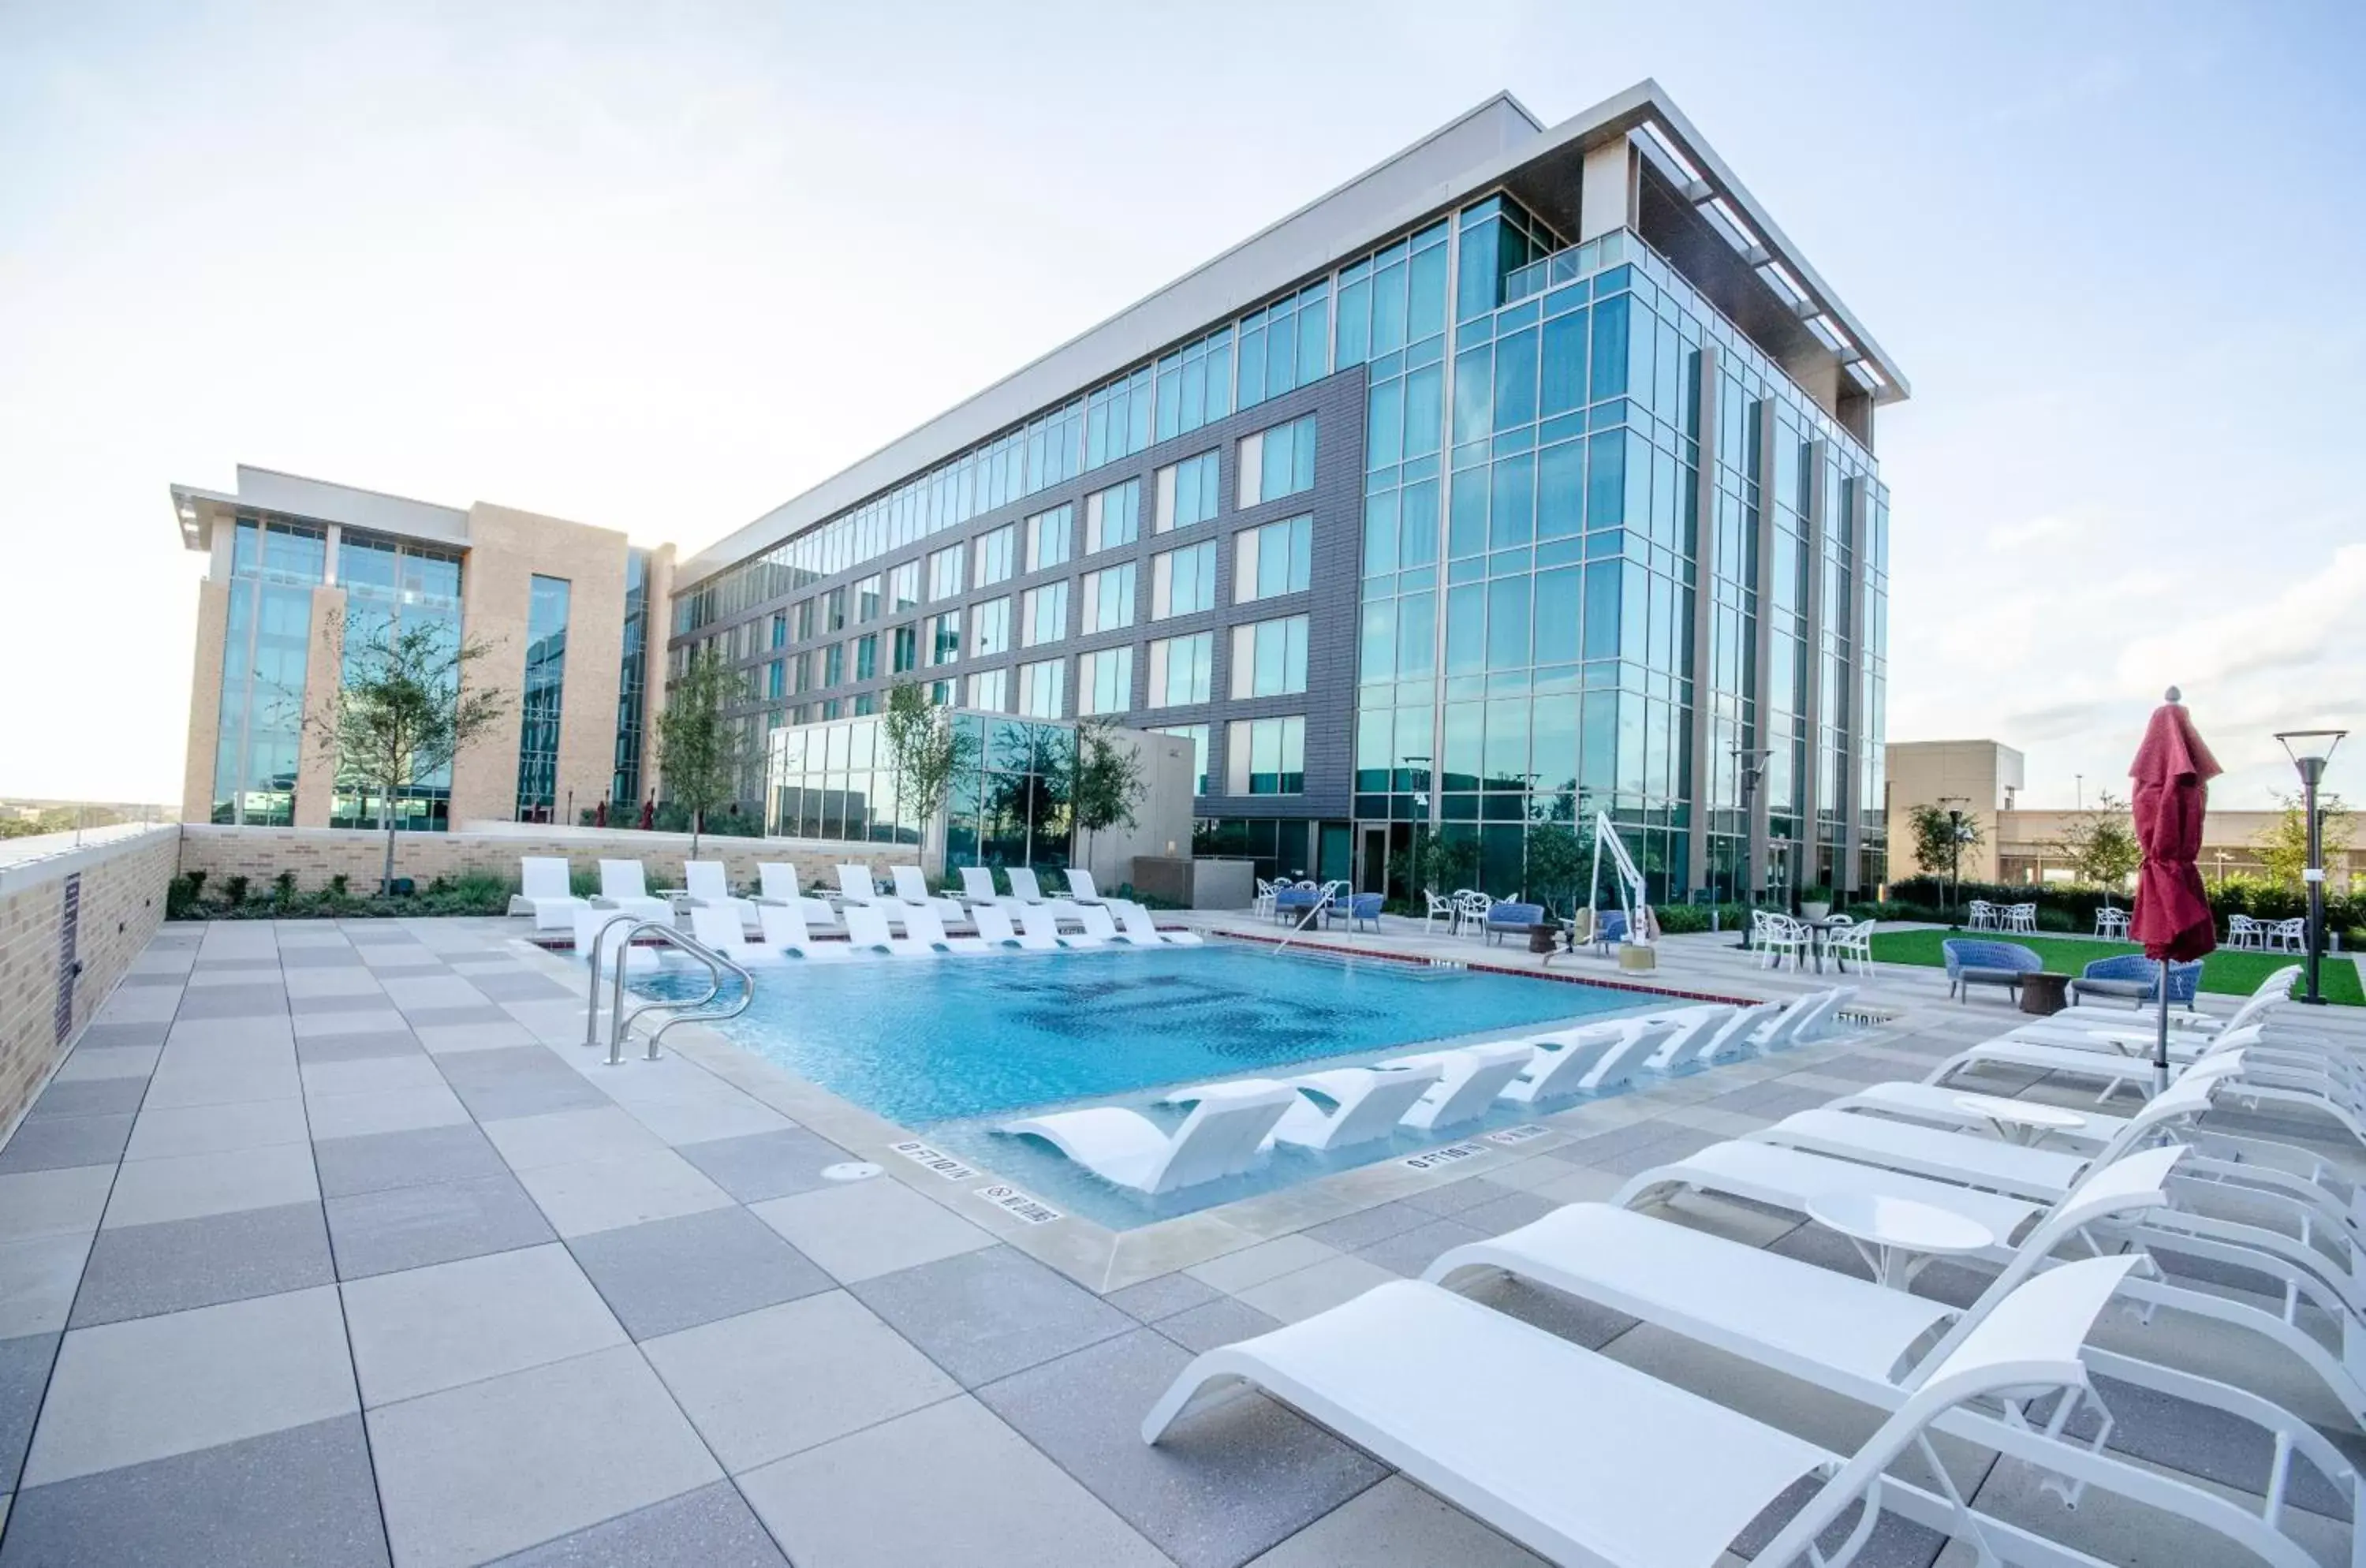 Swimming pool, Property Building in Texas A&M Hotel and Conference Center